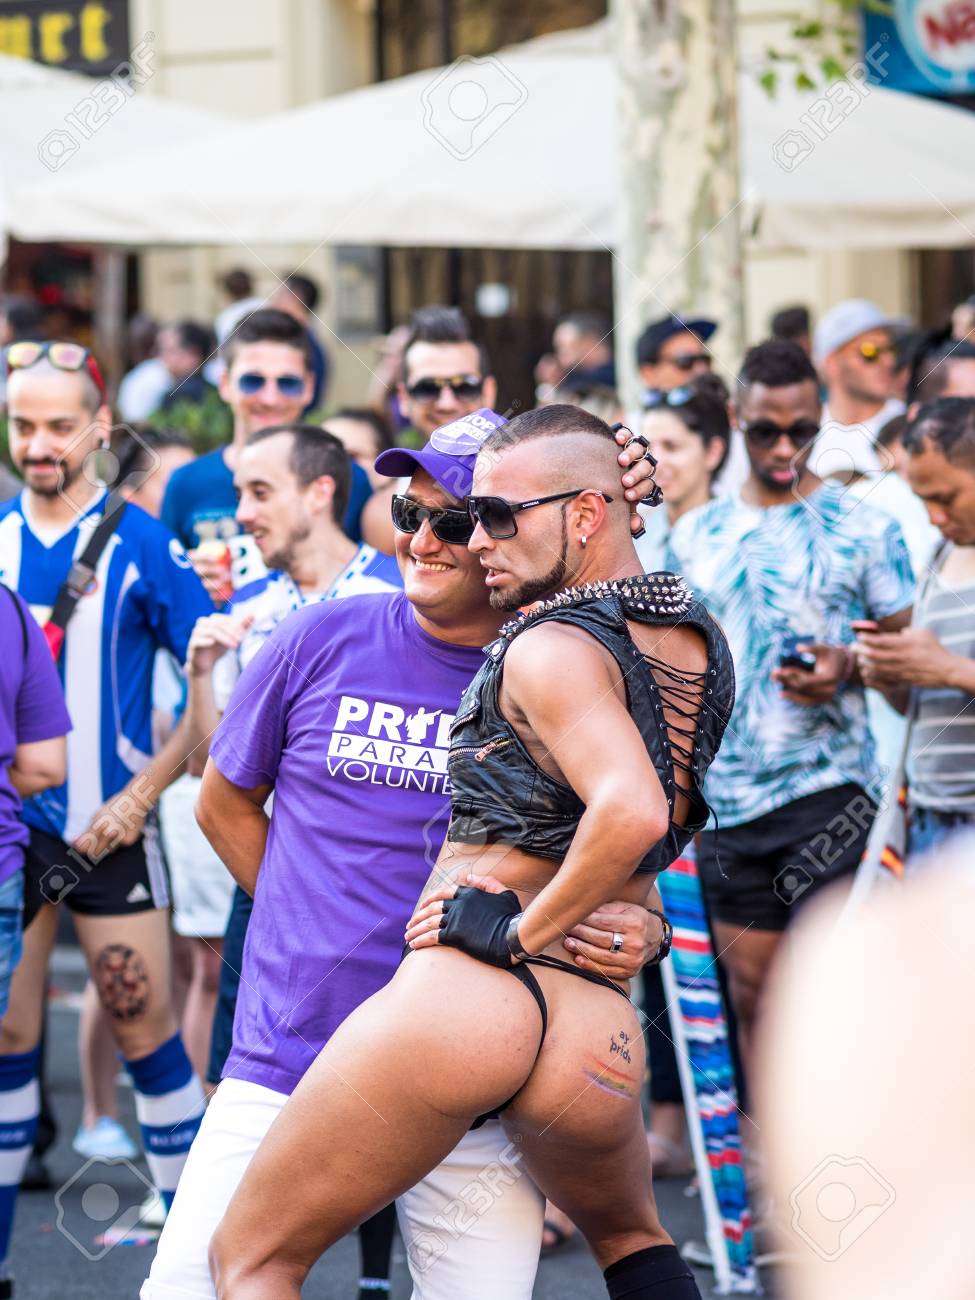 108279760-barcelona-spain-june-27-2015-man-performing-a-show-during-gay-pride-parade-in-barcelona-catalonia-sp.jpg